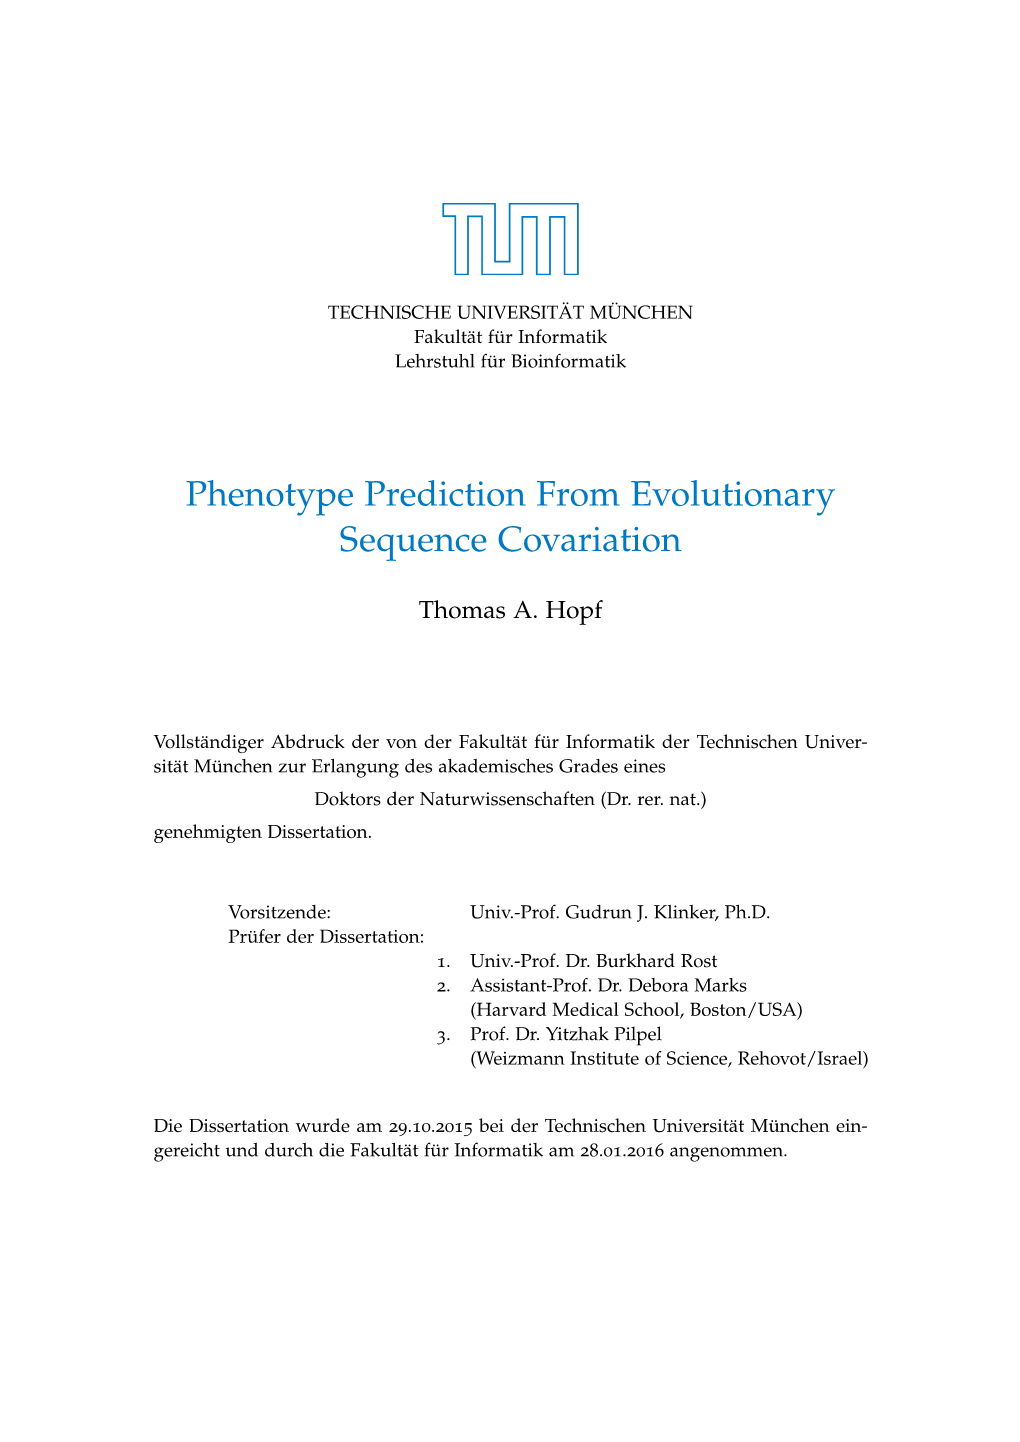 Phenotype Prediction from Evolutionary Sequence Covariation